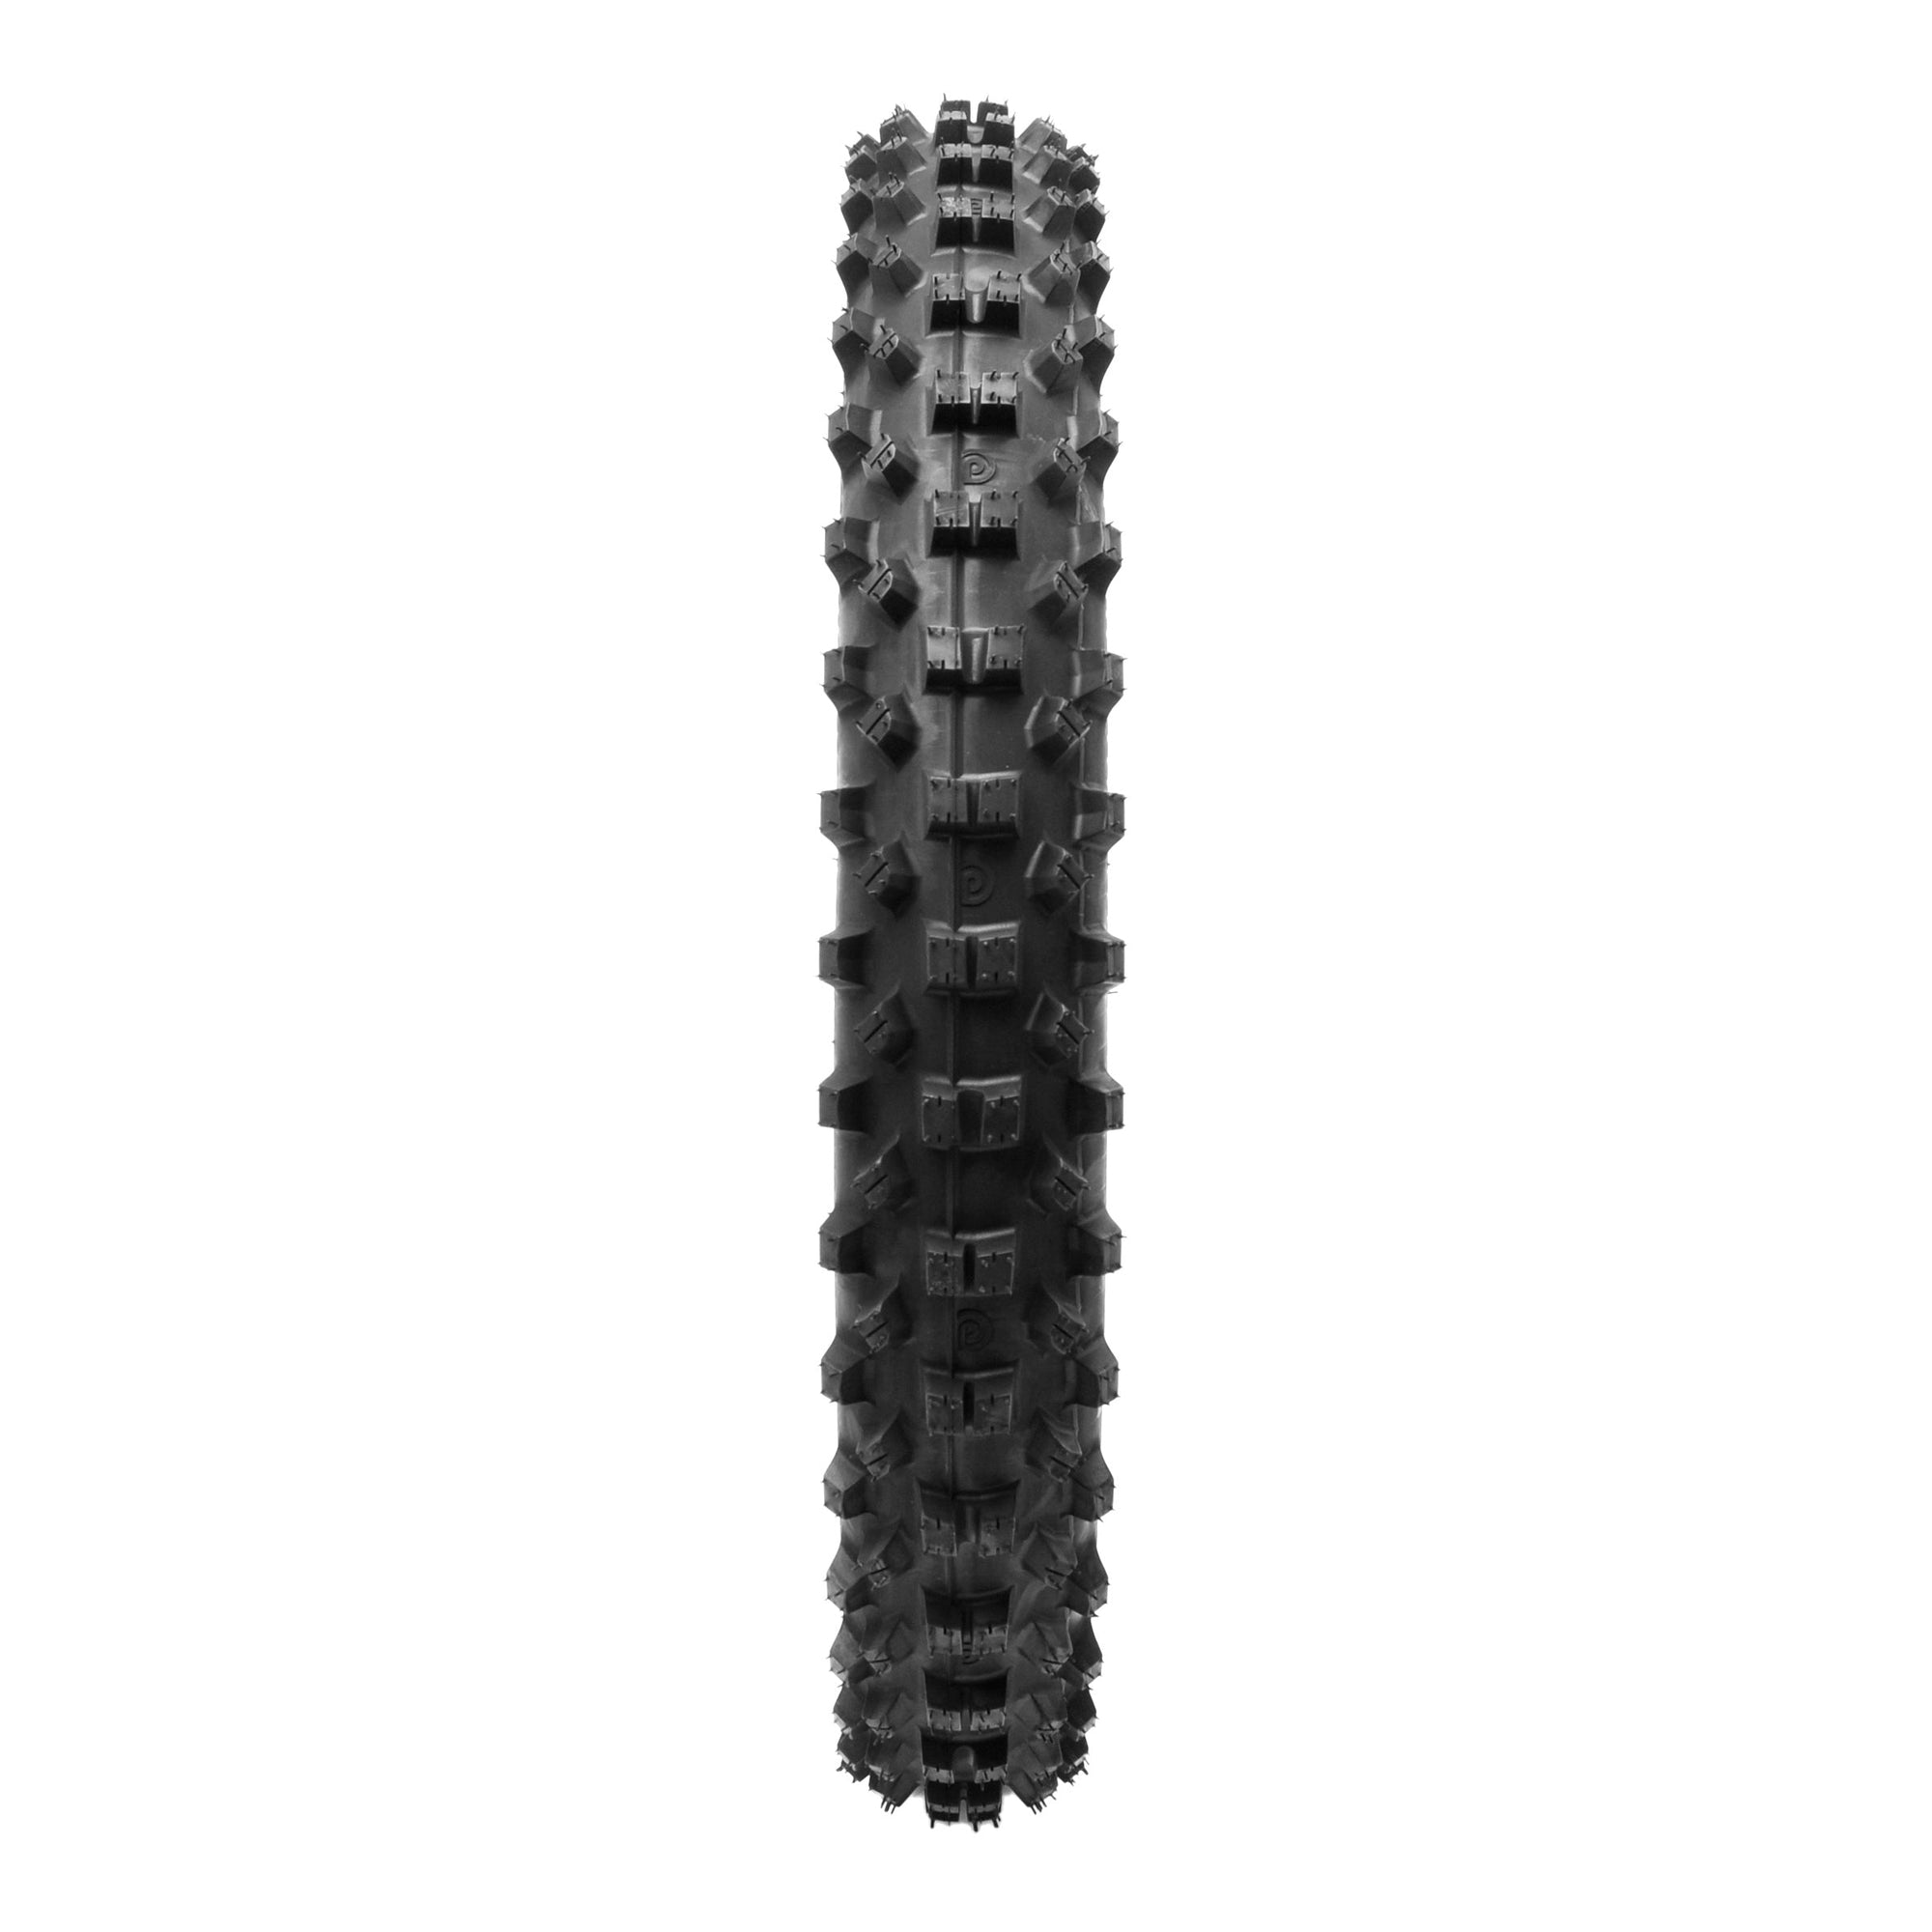 Plews Tyres MX2 Matterly Front tire - 3/4 view